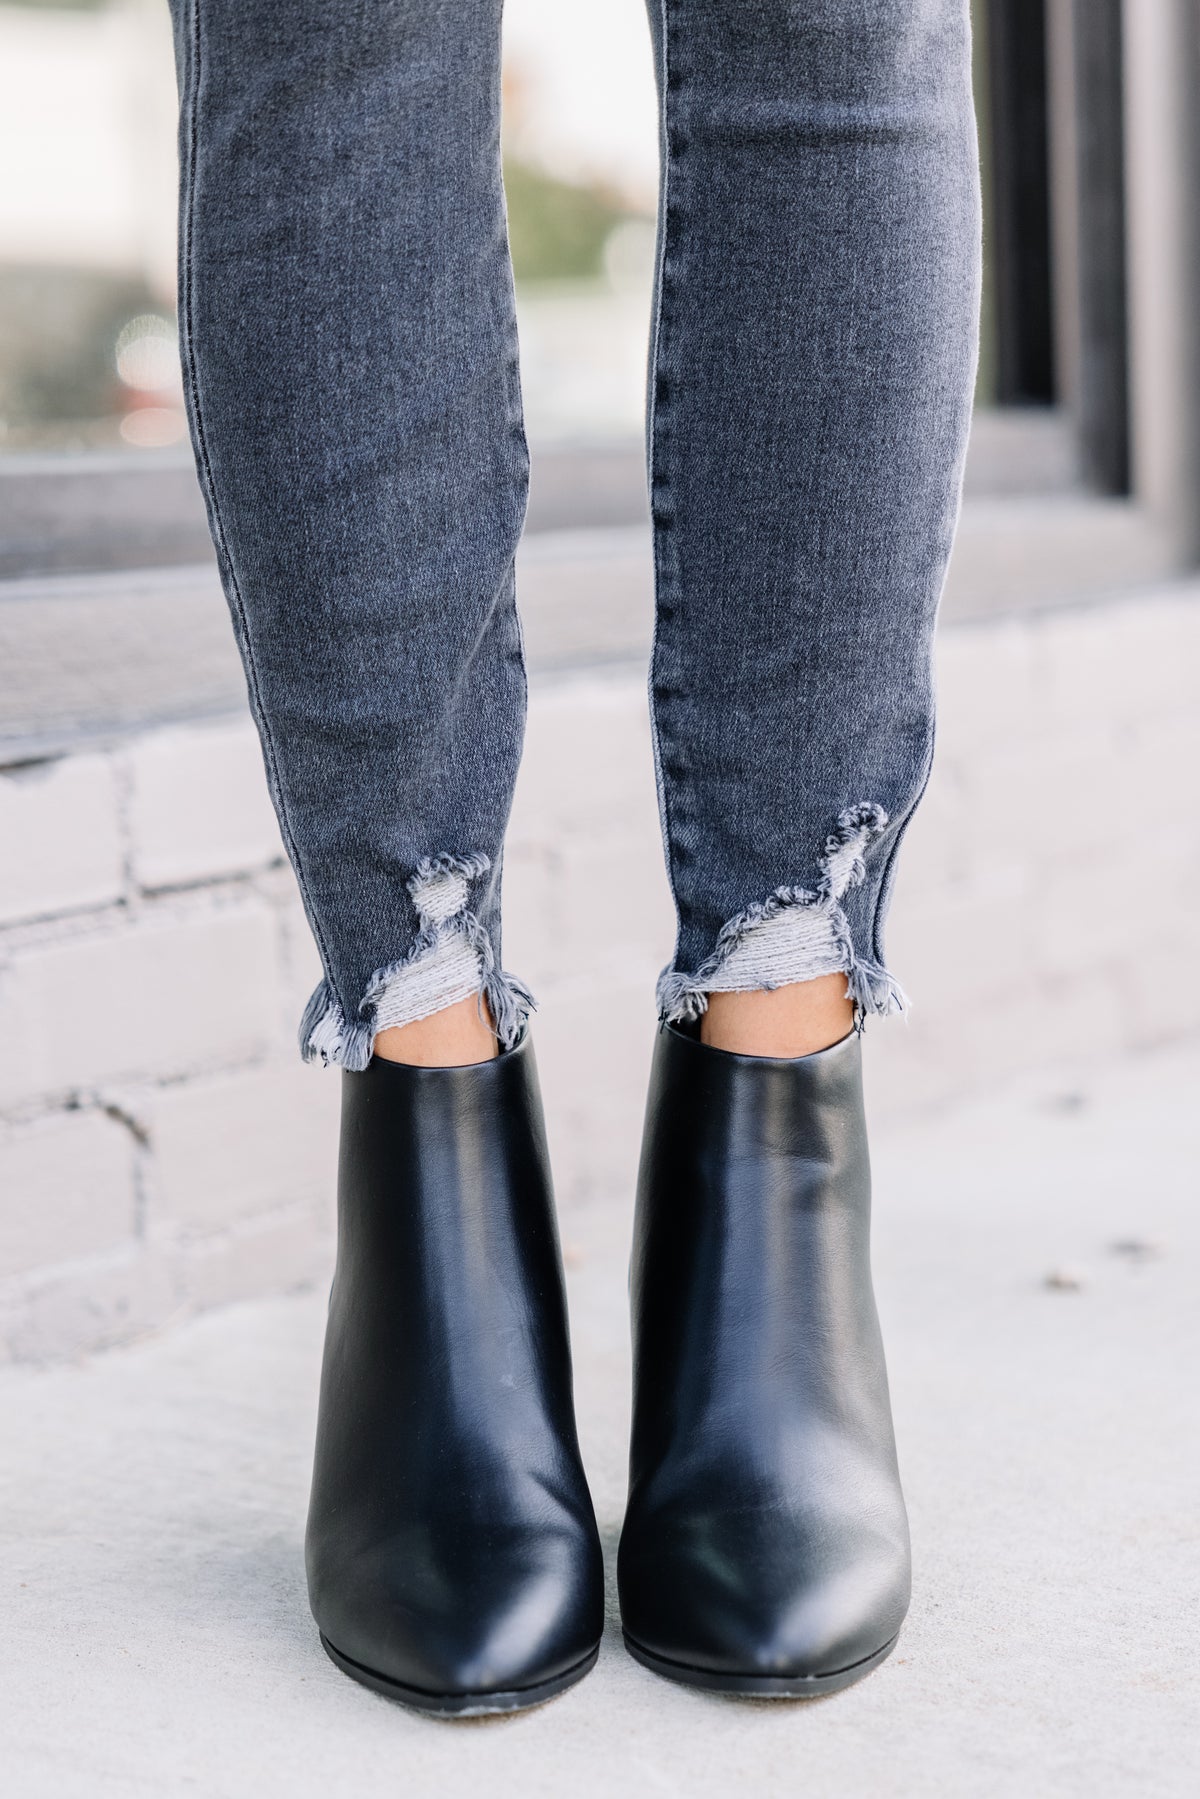 Make The Call Black Booties – Shop the Mint